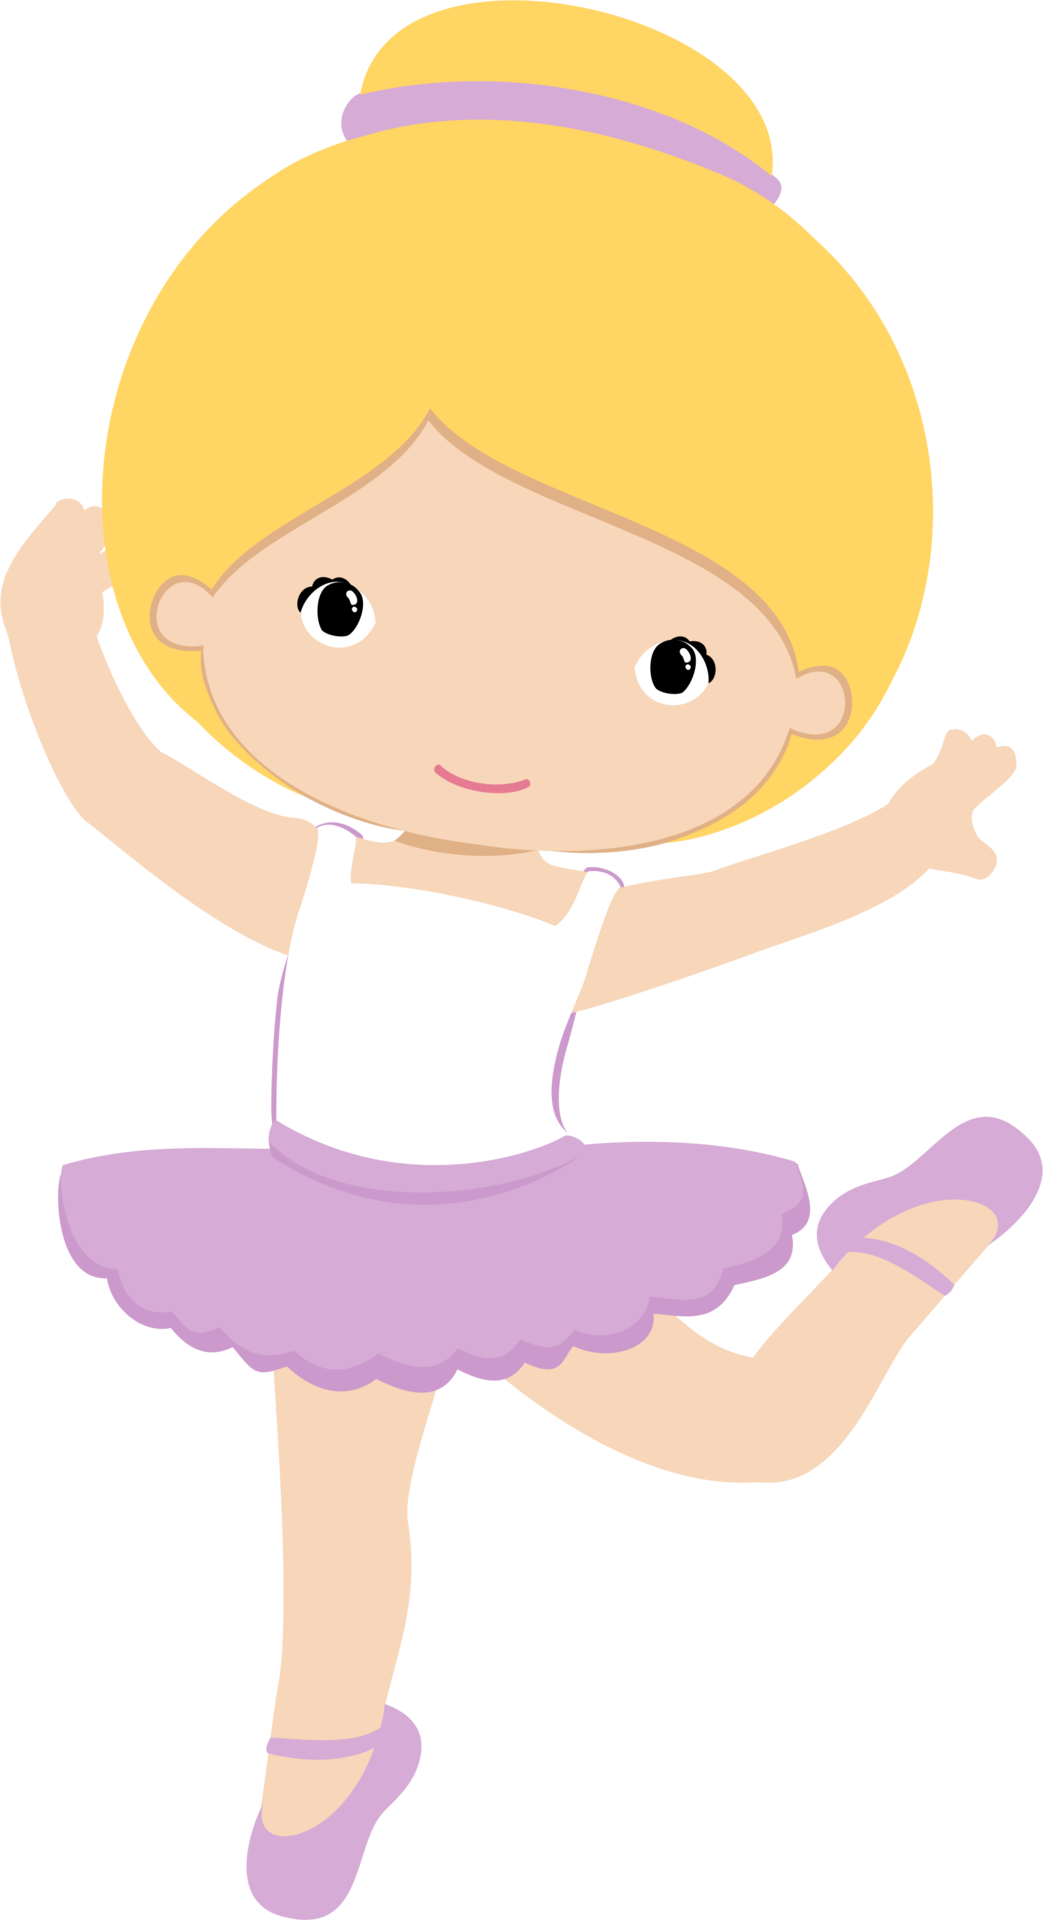 Pepper clipart dancing. Pin by marina on